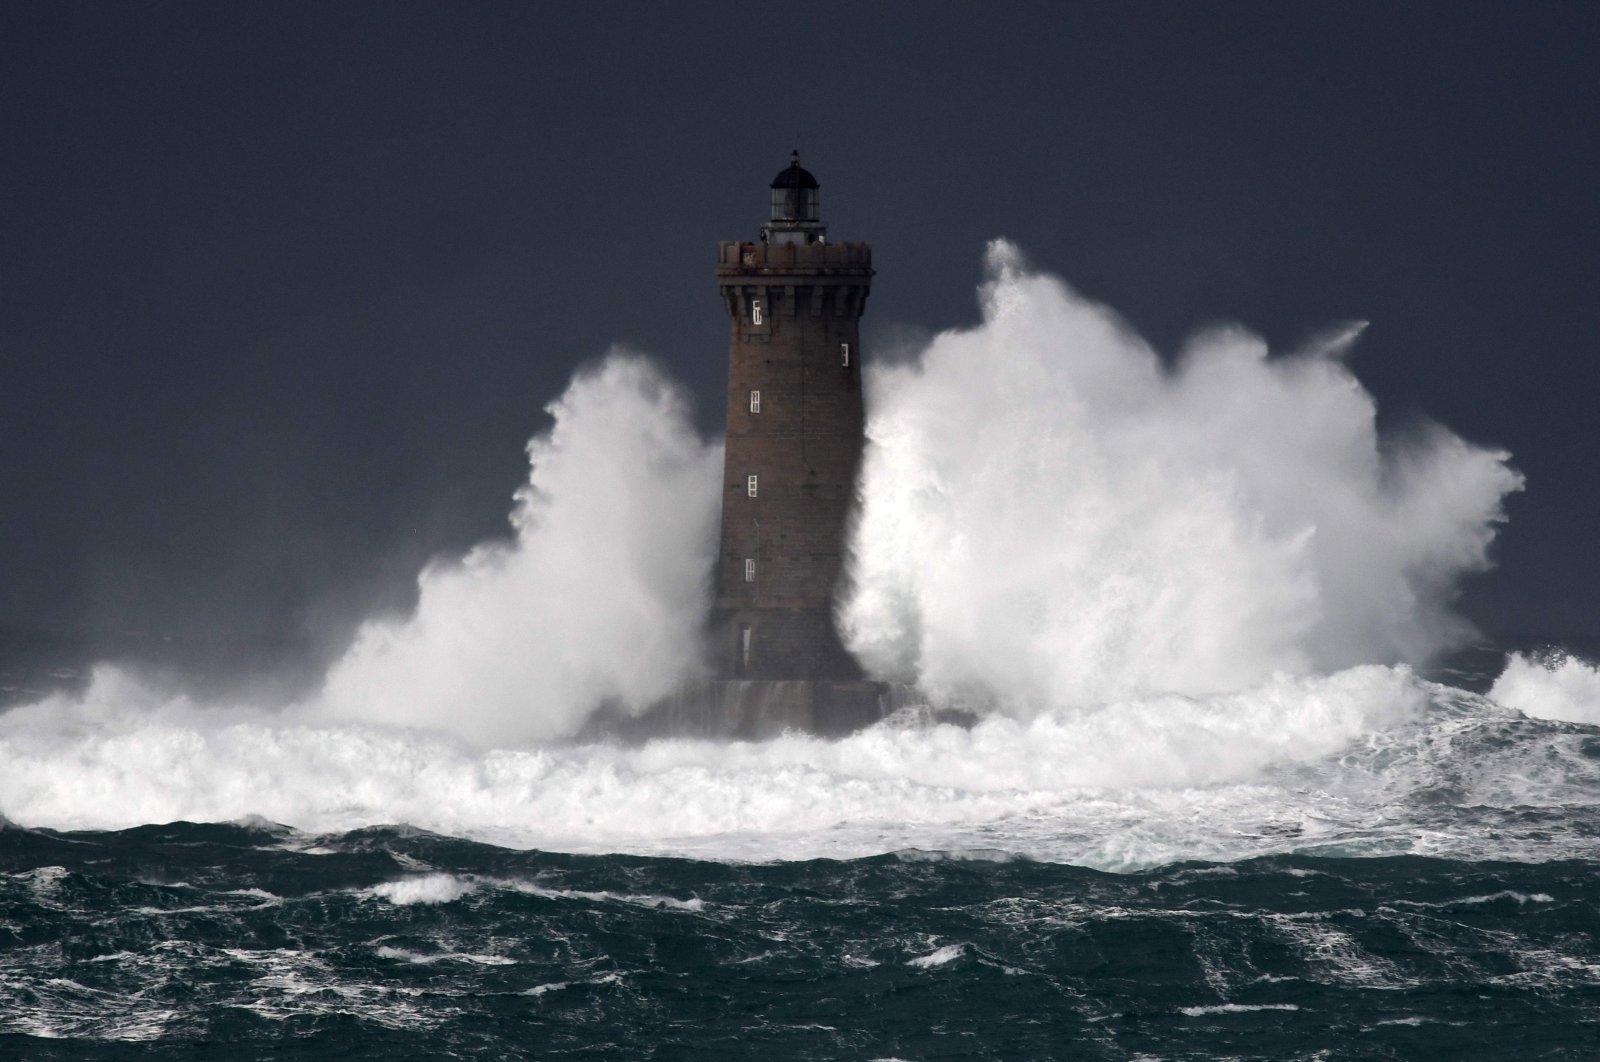 High waves and strong winds hit the Lighthouse of the Chenal du Four in Porspoder, western France, Dec. 27, 2020, as Storm Bella strikes the coast of Britanny. (AFP Photo)